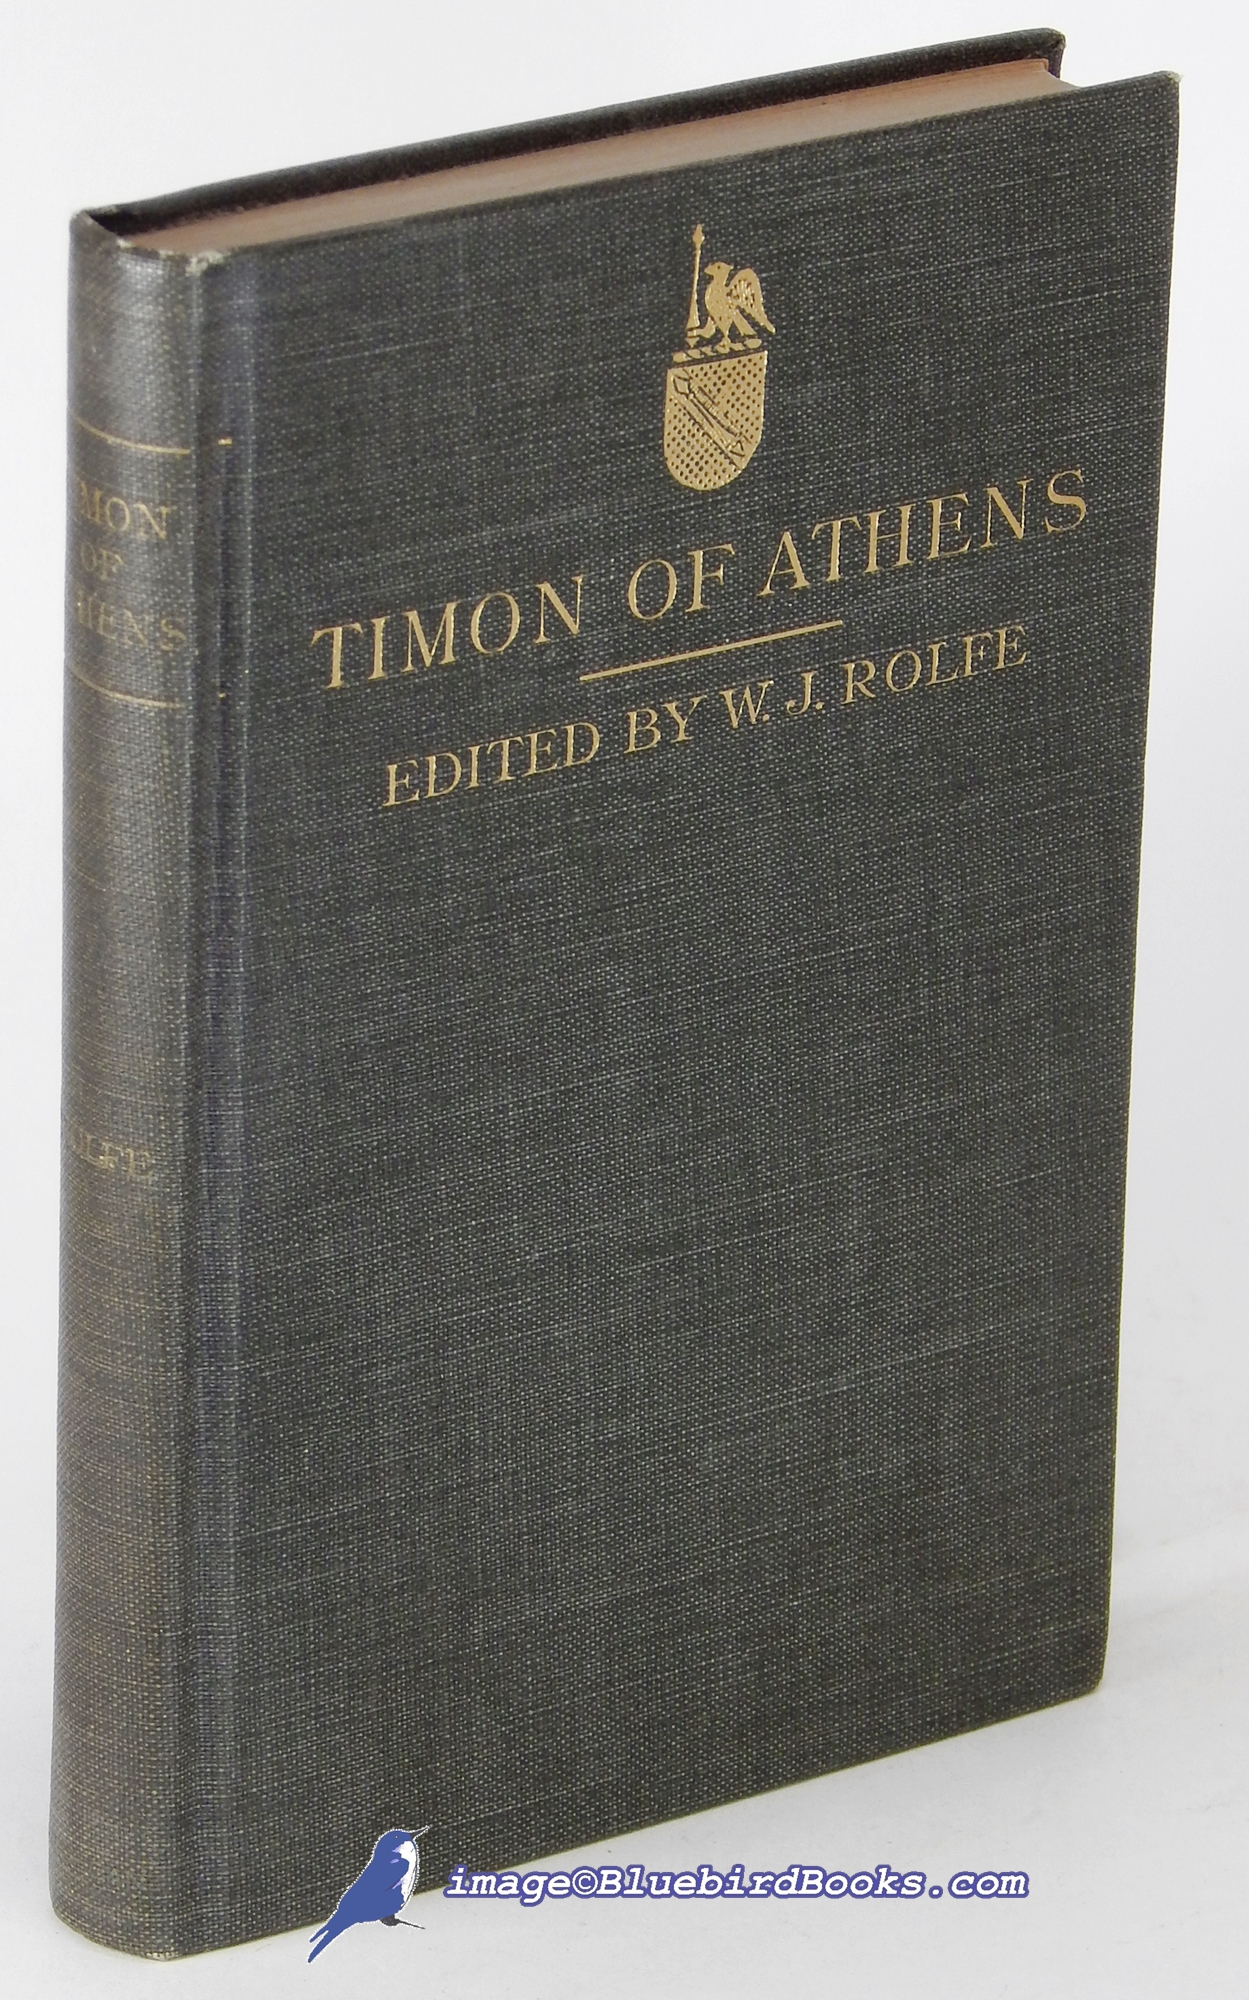 SHAKESPEARE, WILLIAM; ROLFE, WILLIAM J. (EDITOR) - Shakespeare's Tragedy of Timon of Athens